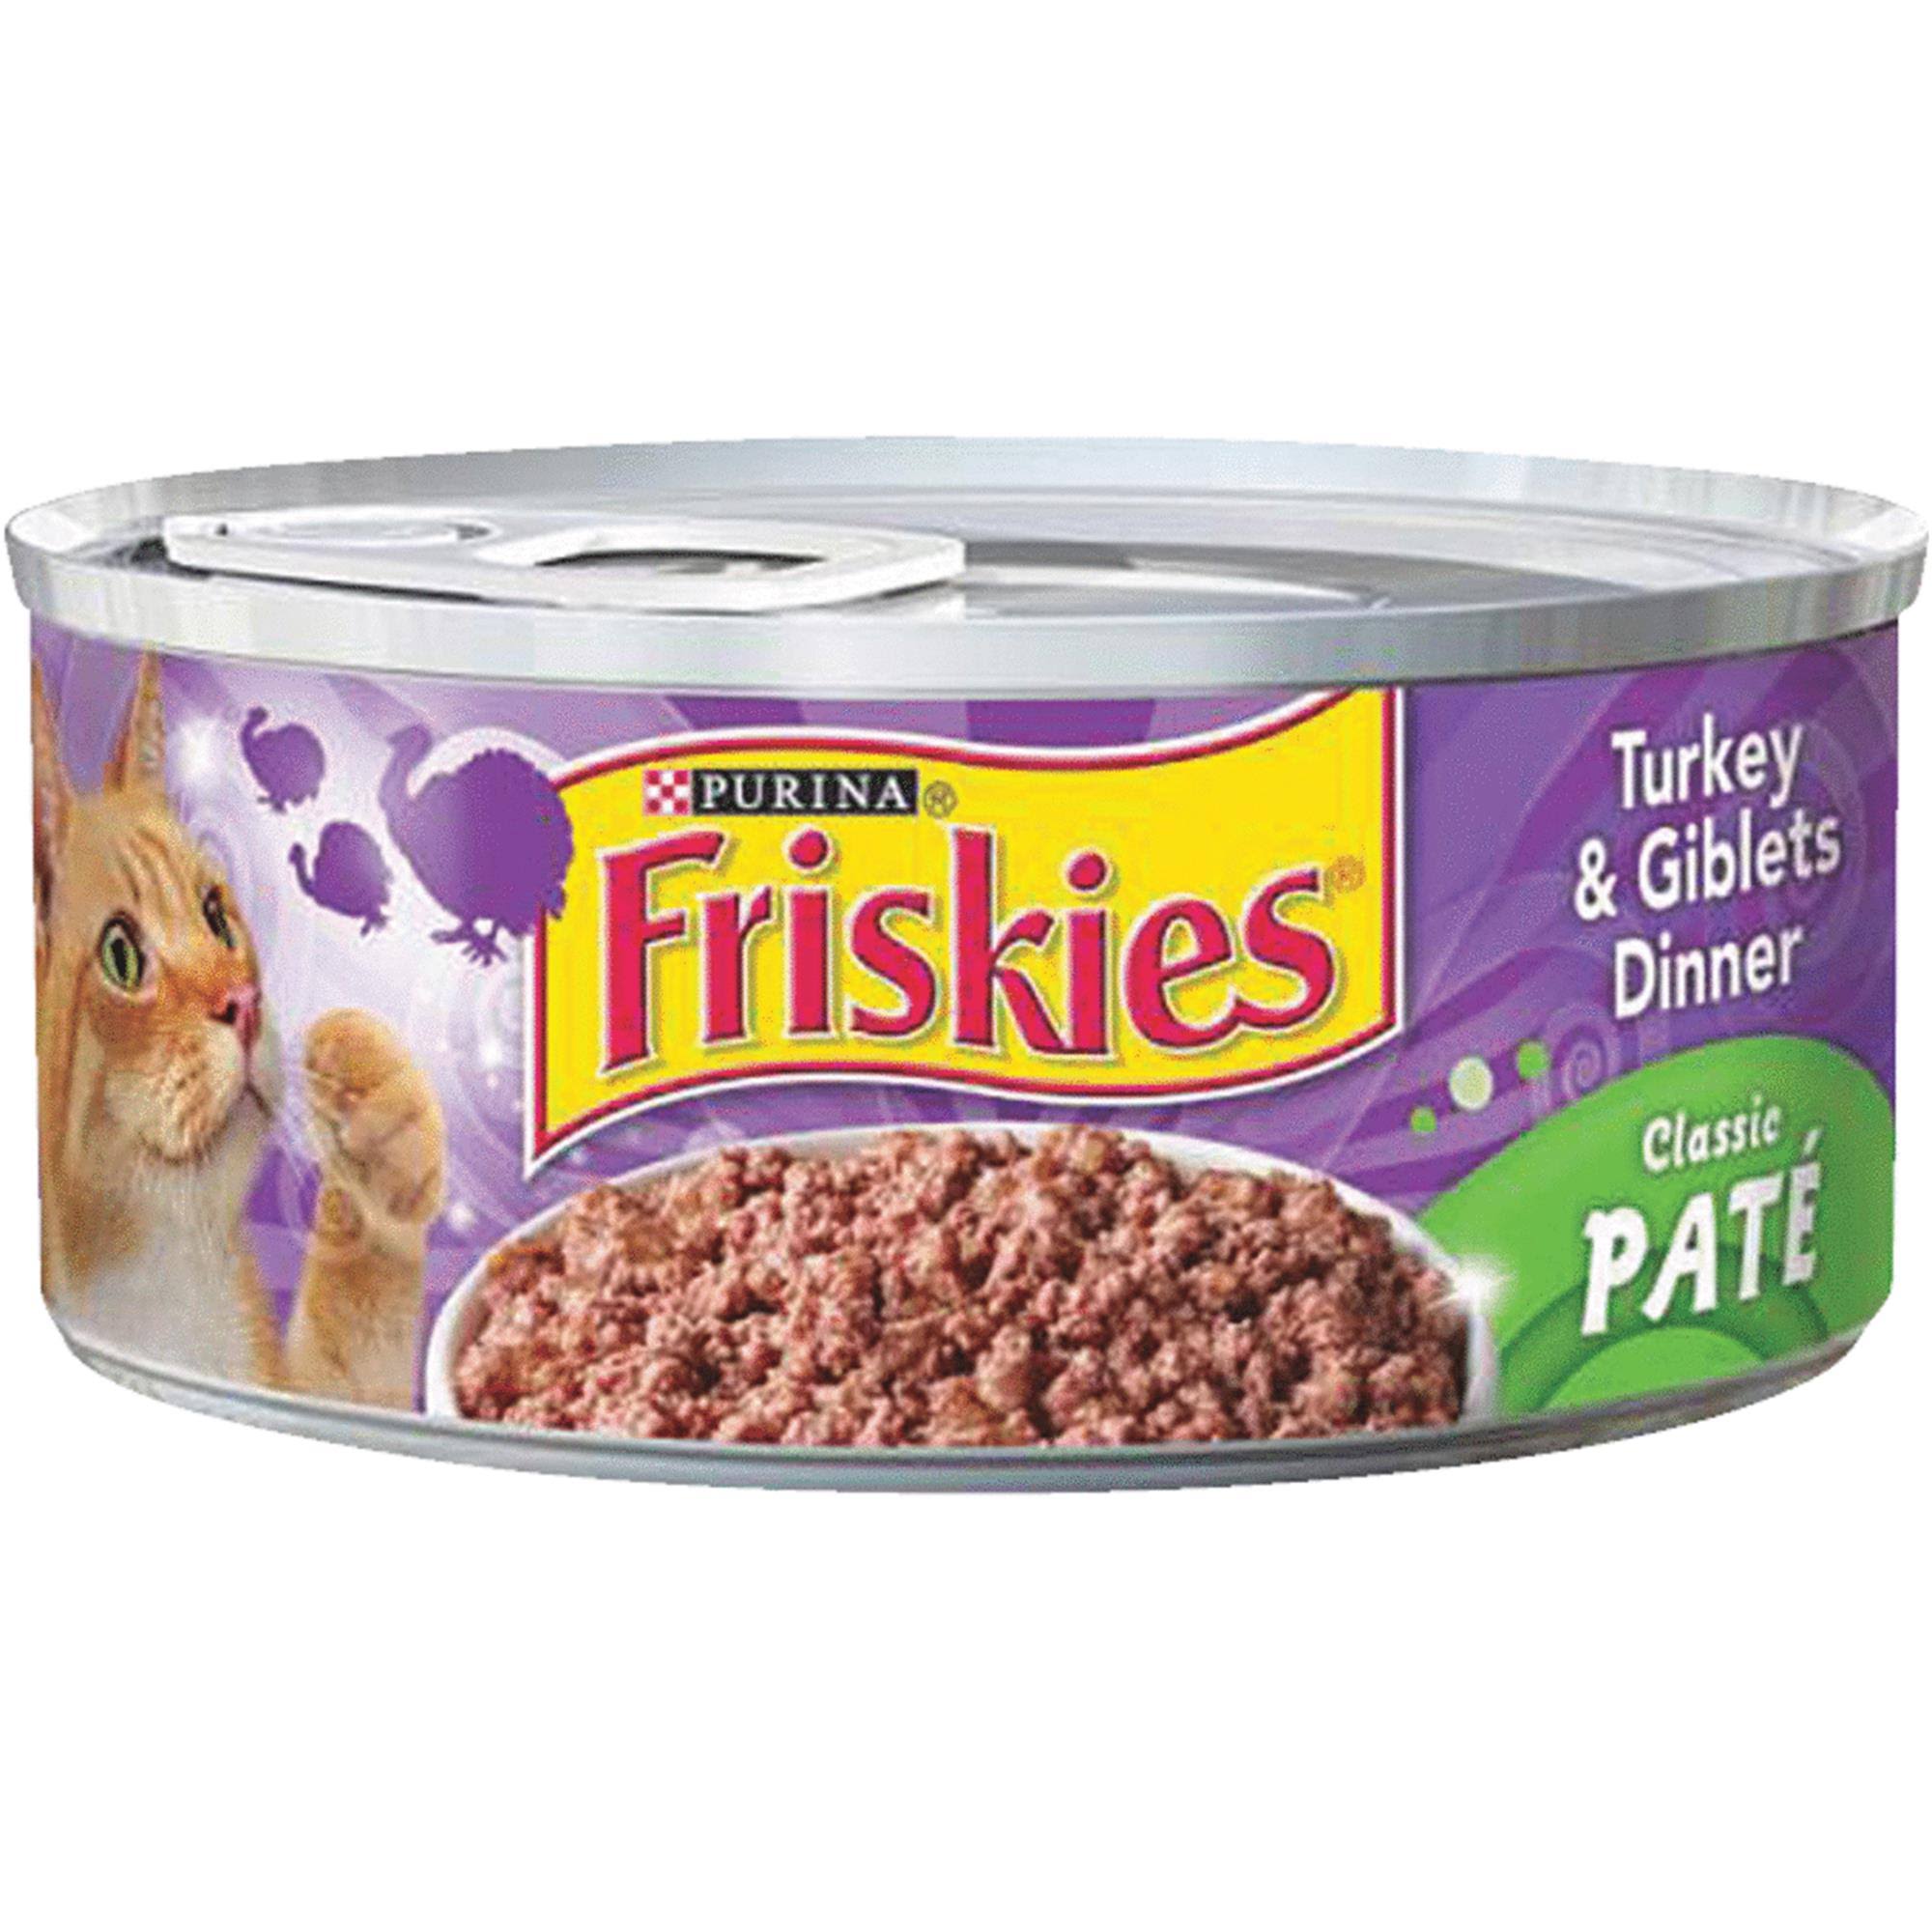 Purina Friskies Pate Turkey and Giblets Dinner Cat Food - 5.5oz